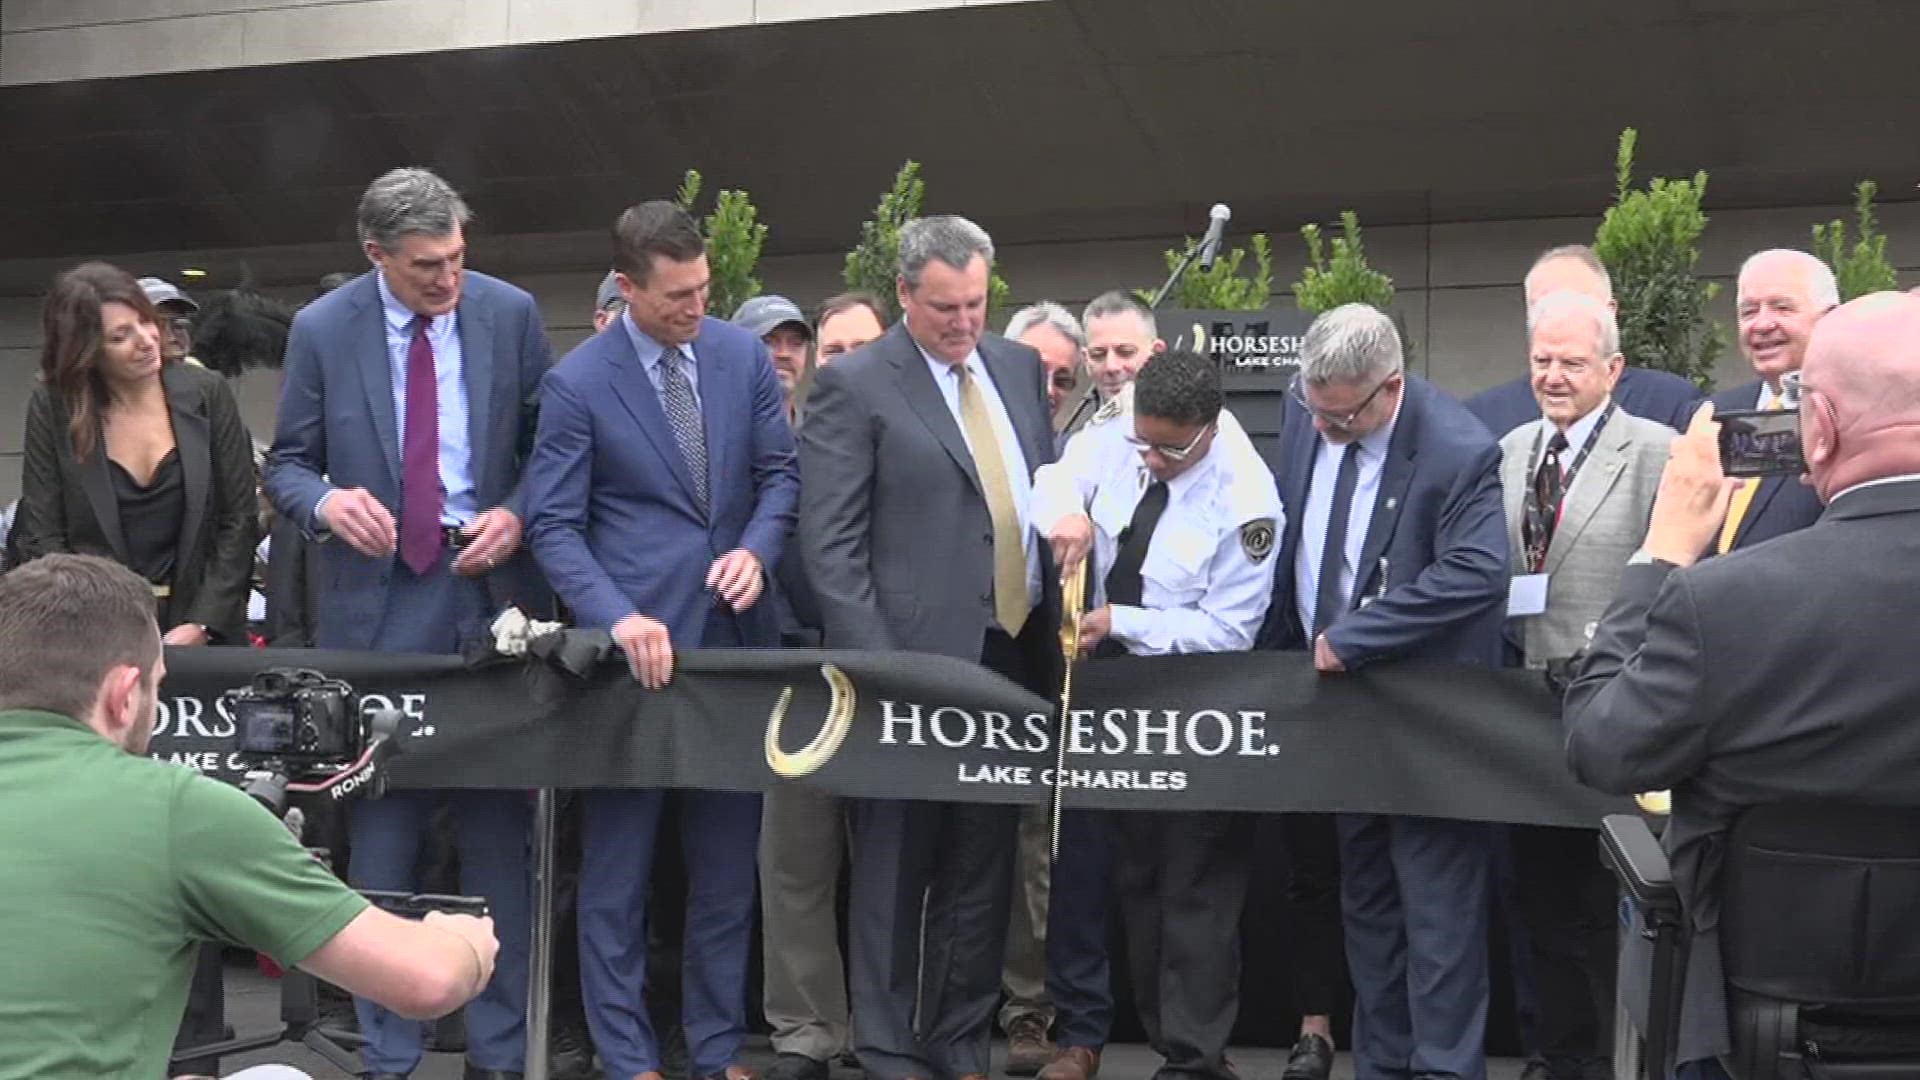 Horseshoe Casino will replace the former Isle of Capri Lake Charles, which  was forced to close due to the COVID-19 pandemic and damage from Hurricane Laura.